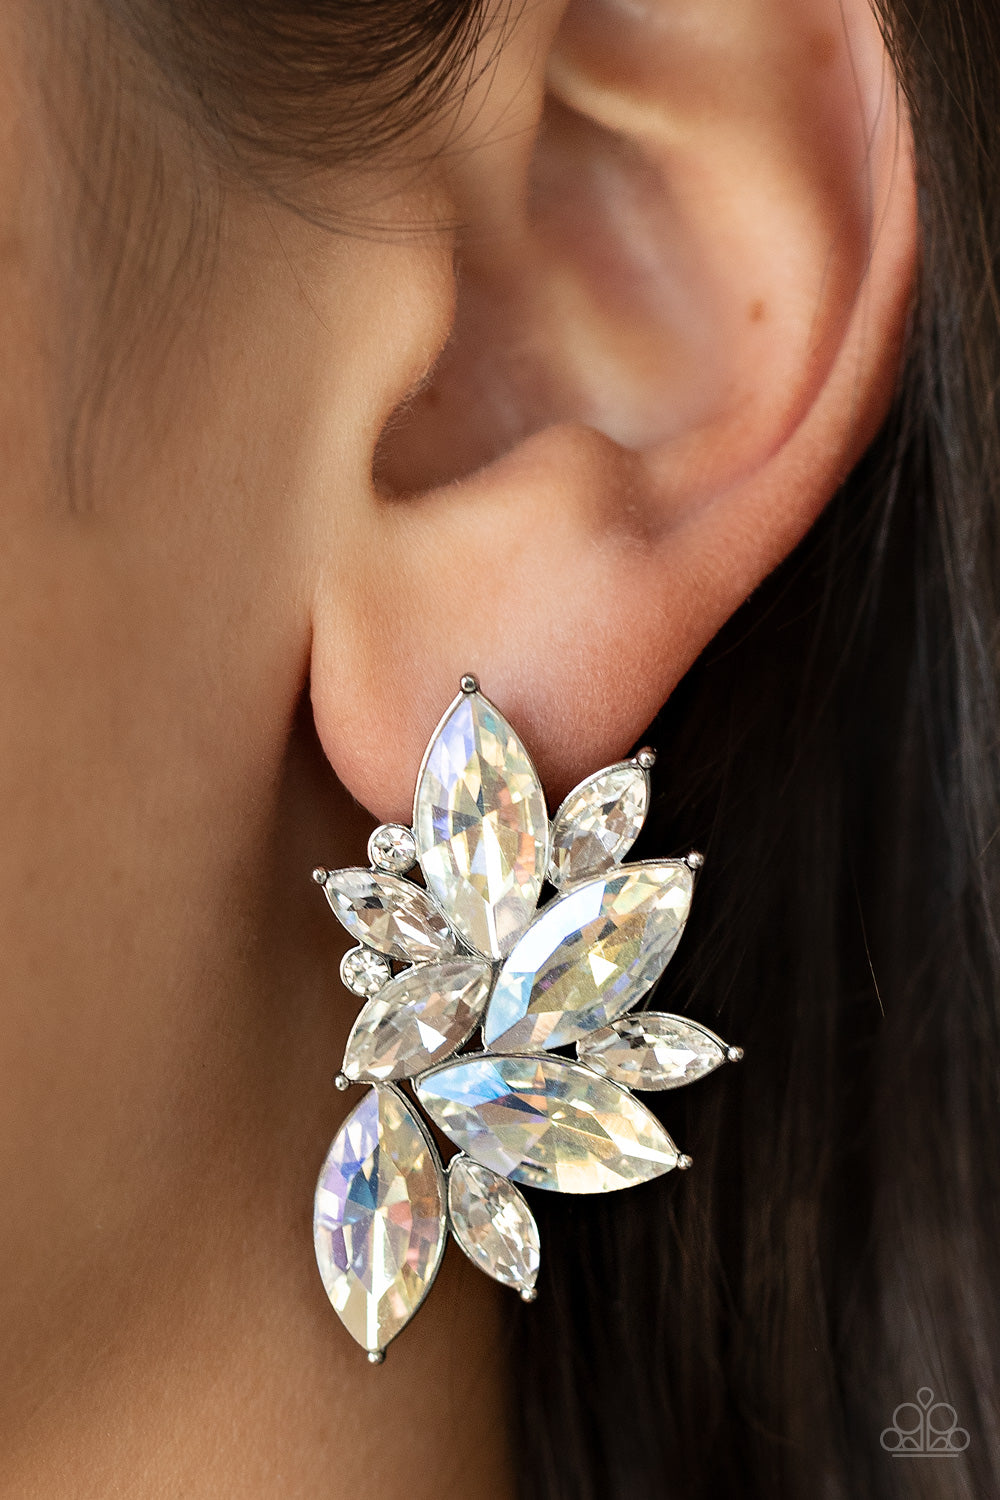 Infused with dainty white rhinestones, a stellar display of iridescent and white marquise cut rhinestones fan out into a spectacular centerpiece. Earring attaches to a standard post fitting.  Sold as one pair of post earrings.